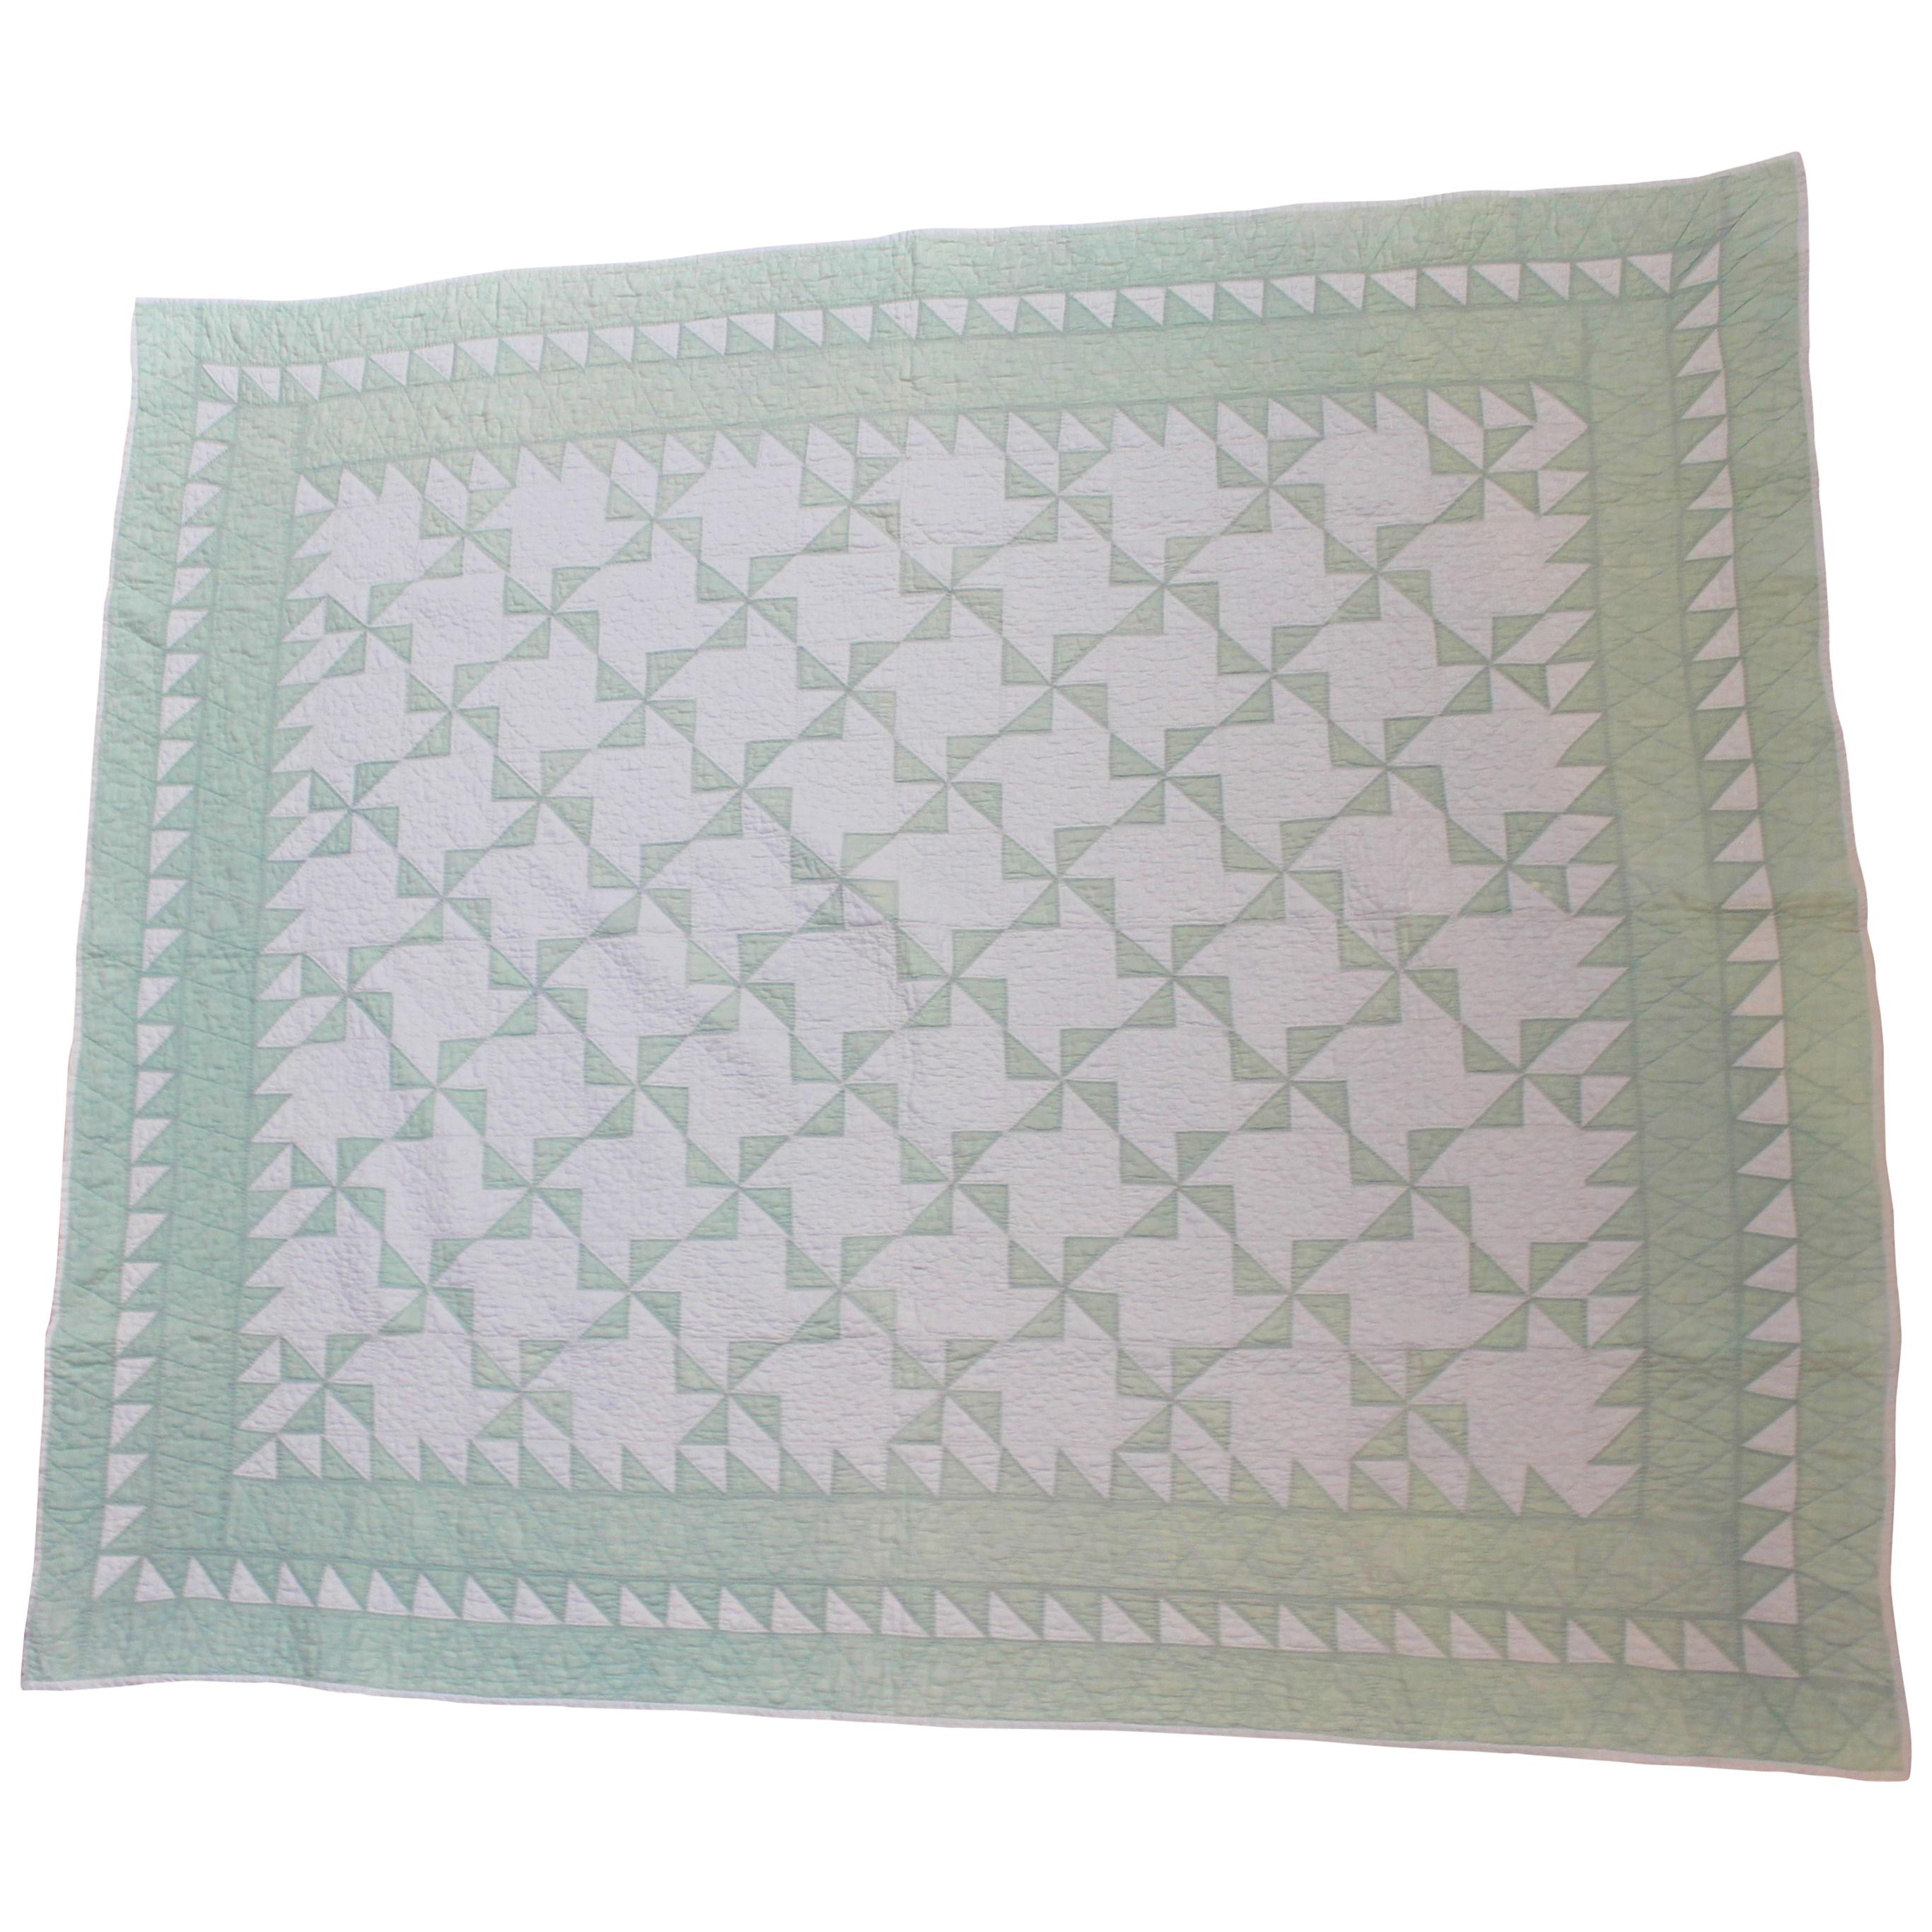 Antique Quilt Green and White Pin Wheels